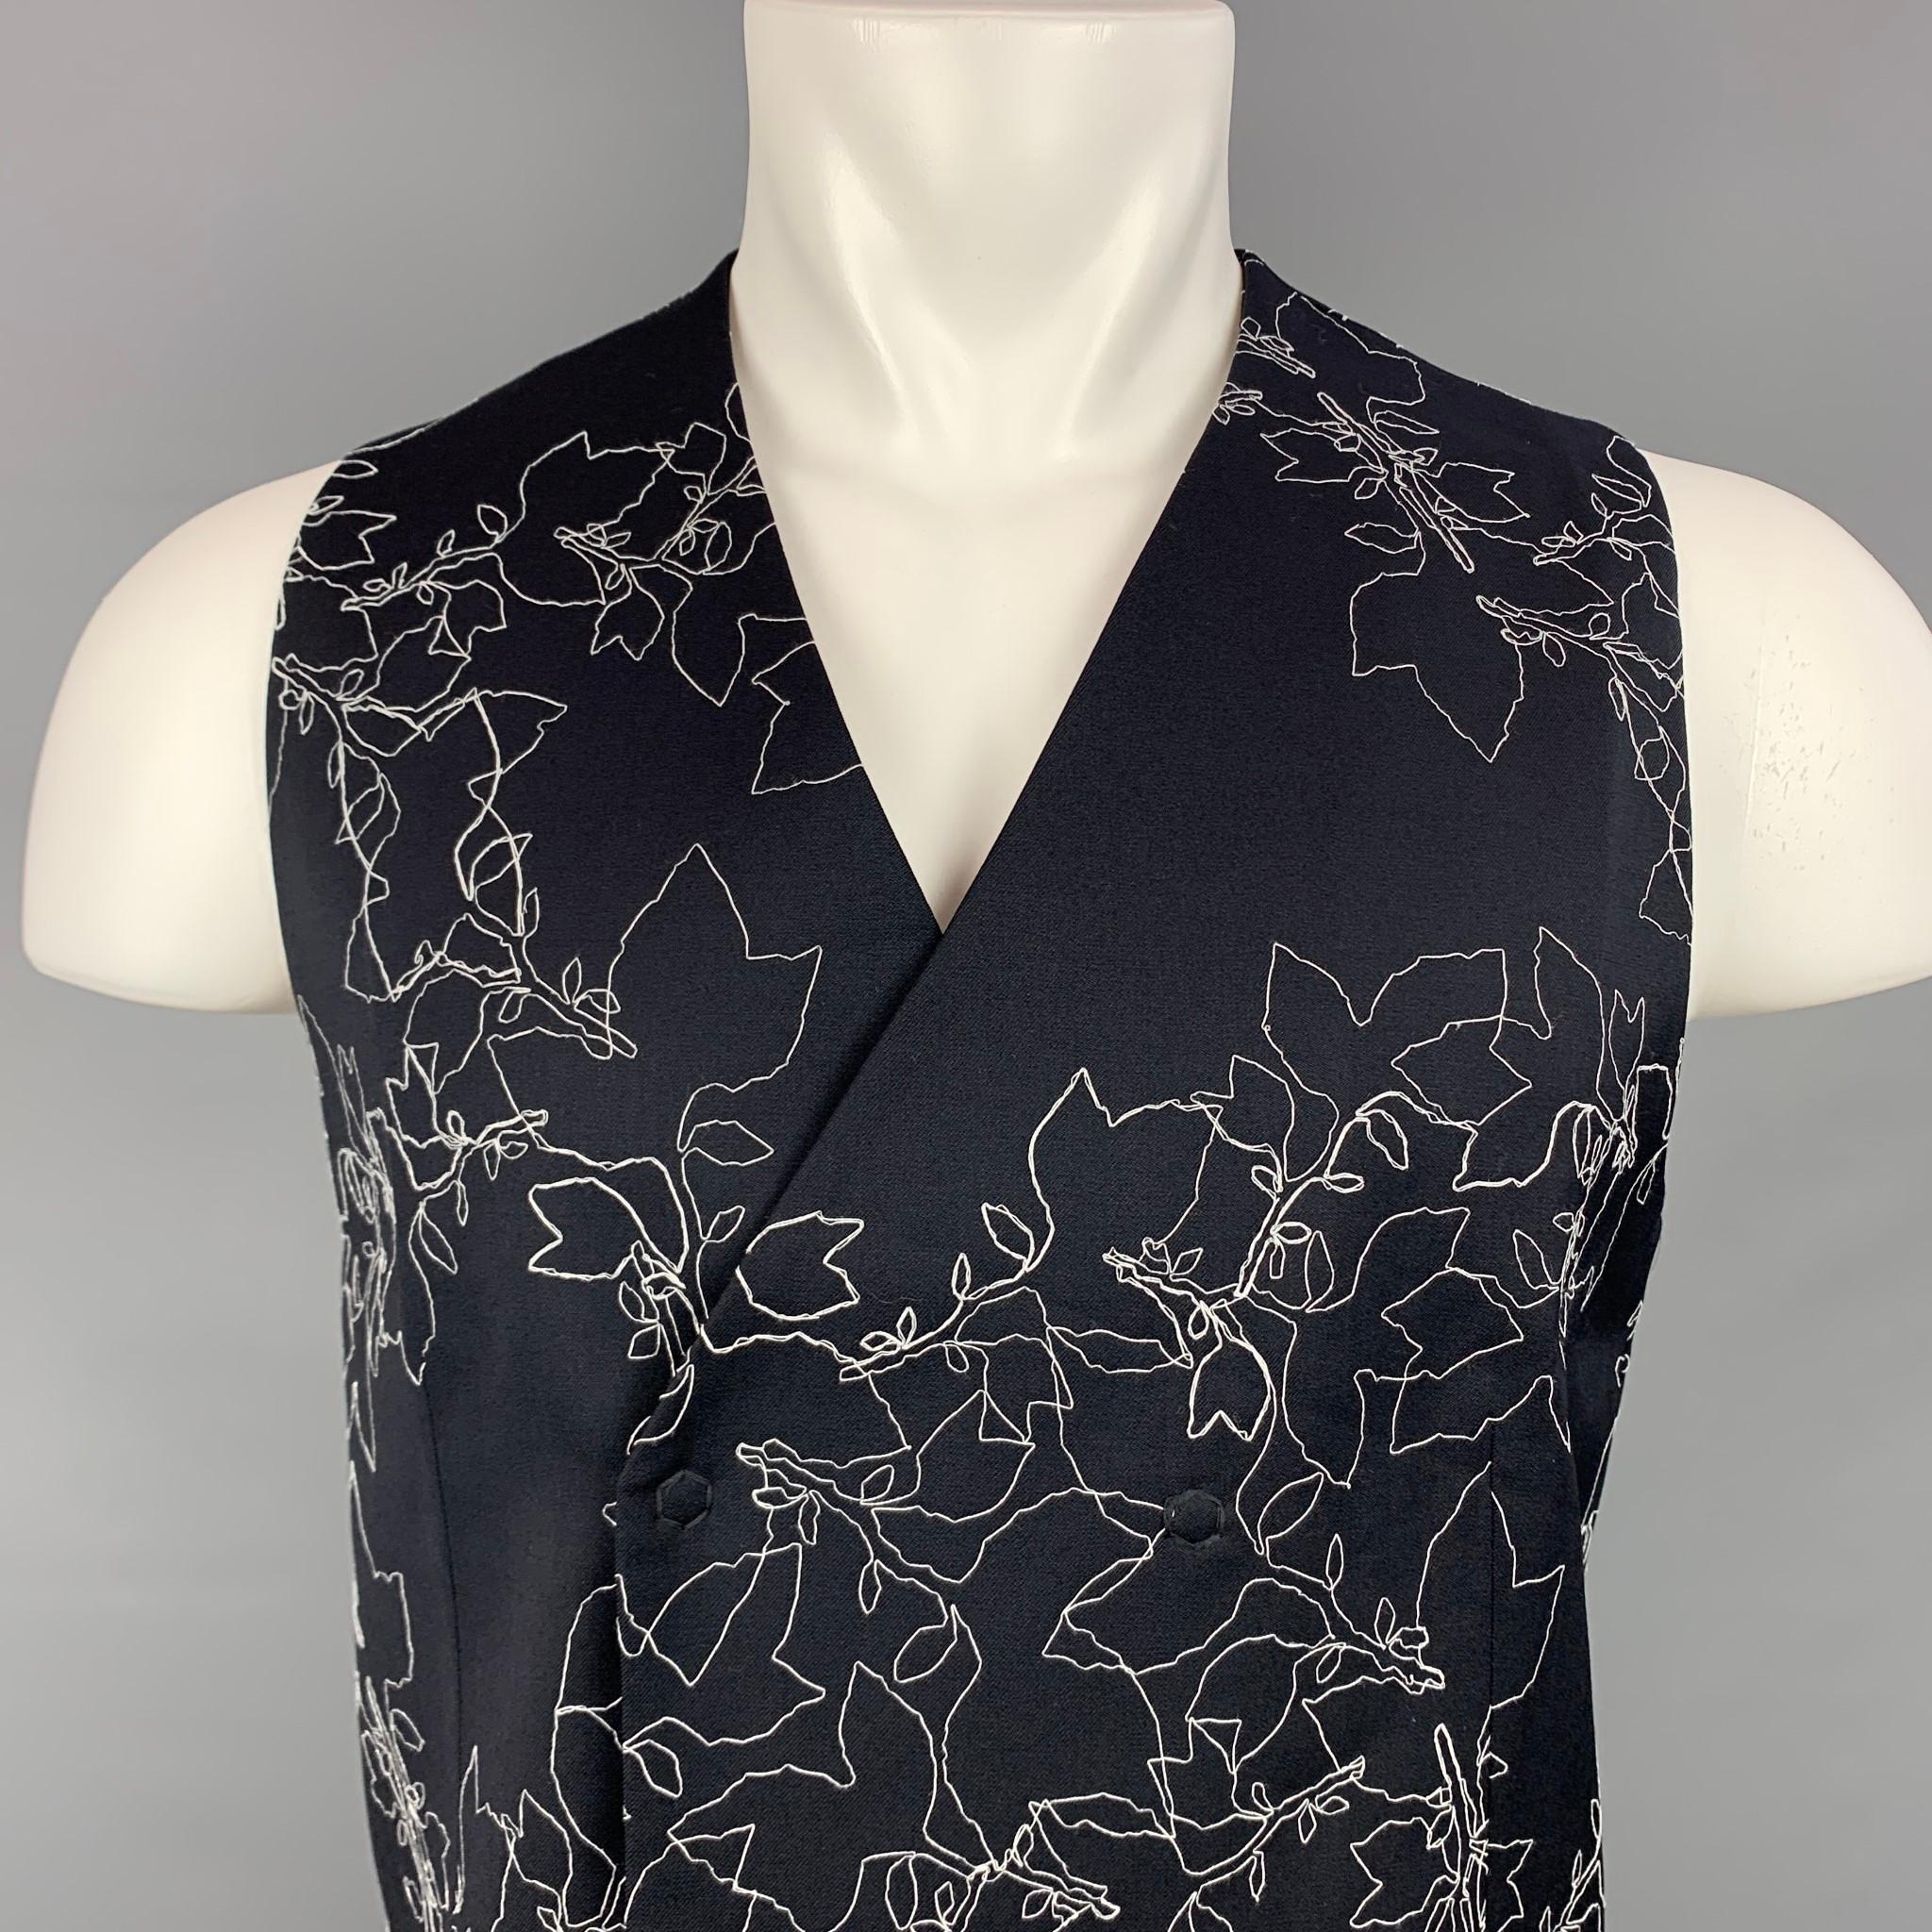 EMPORIO ARMANI vest comes in a black & white wool with a embroidered design featuring a full liner and a double breasted snap button closure. Made in Italy.

New With Tags. 
Marked: IT 48 / CHN 175/96A / BRA 48 / MEX 48 / USA 48
Original Retail